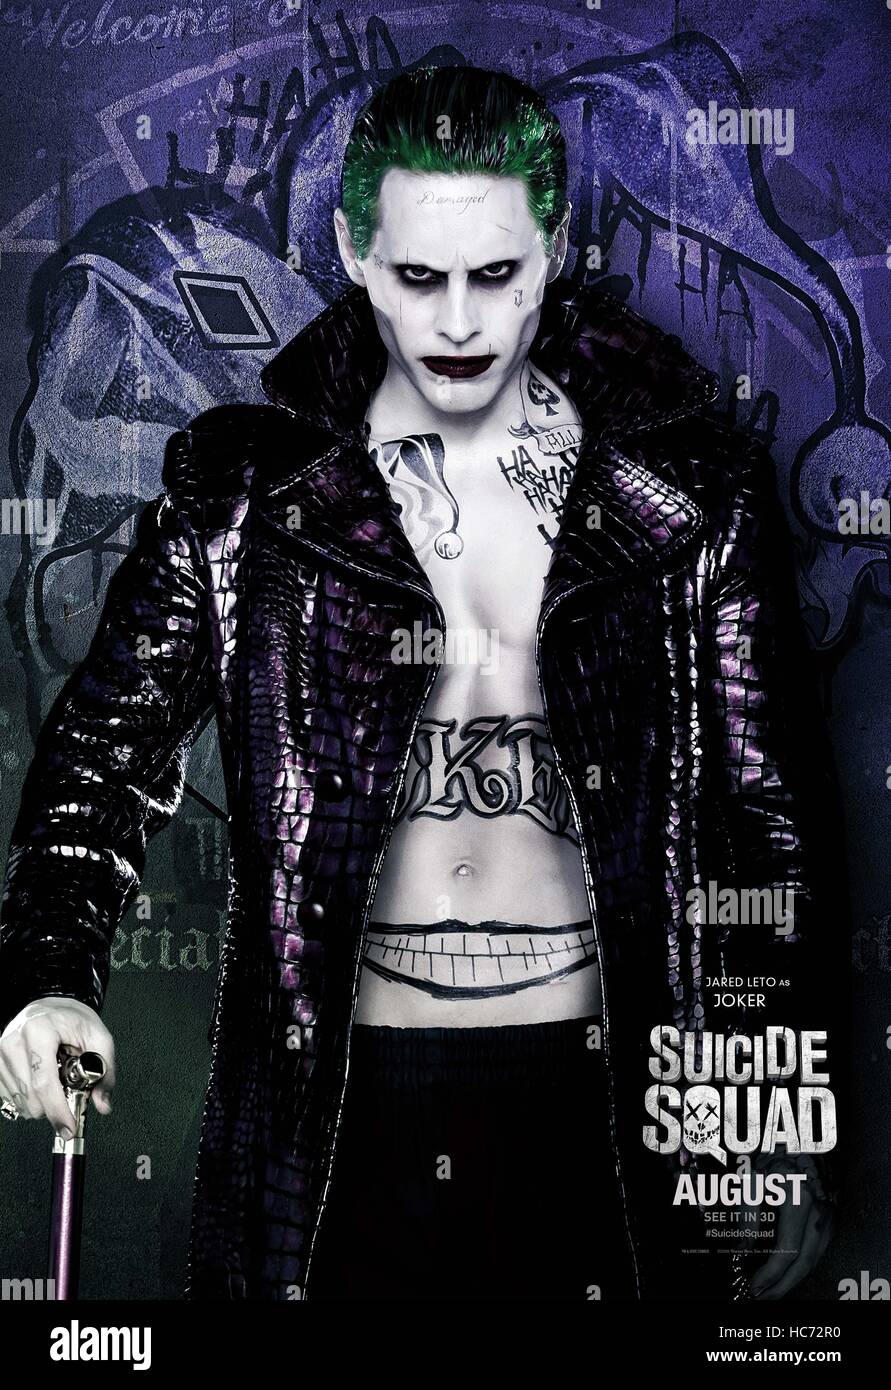 RELEASE DATE: August 5, 2016 TITLE: Suicide Squad STUDIO: Atlas Entertainment DIRECTOR: David Ayer PLOT: A secret government agency recruits imprisoned supervillains to execute dangerous black ops missions in exchange for clemency STARRING: Jared Leto as The Joker poster (Credit Image: c Atlas Entertainment/Entertainment Pictures/) Stock Photo